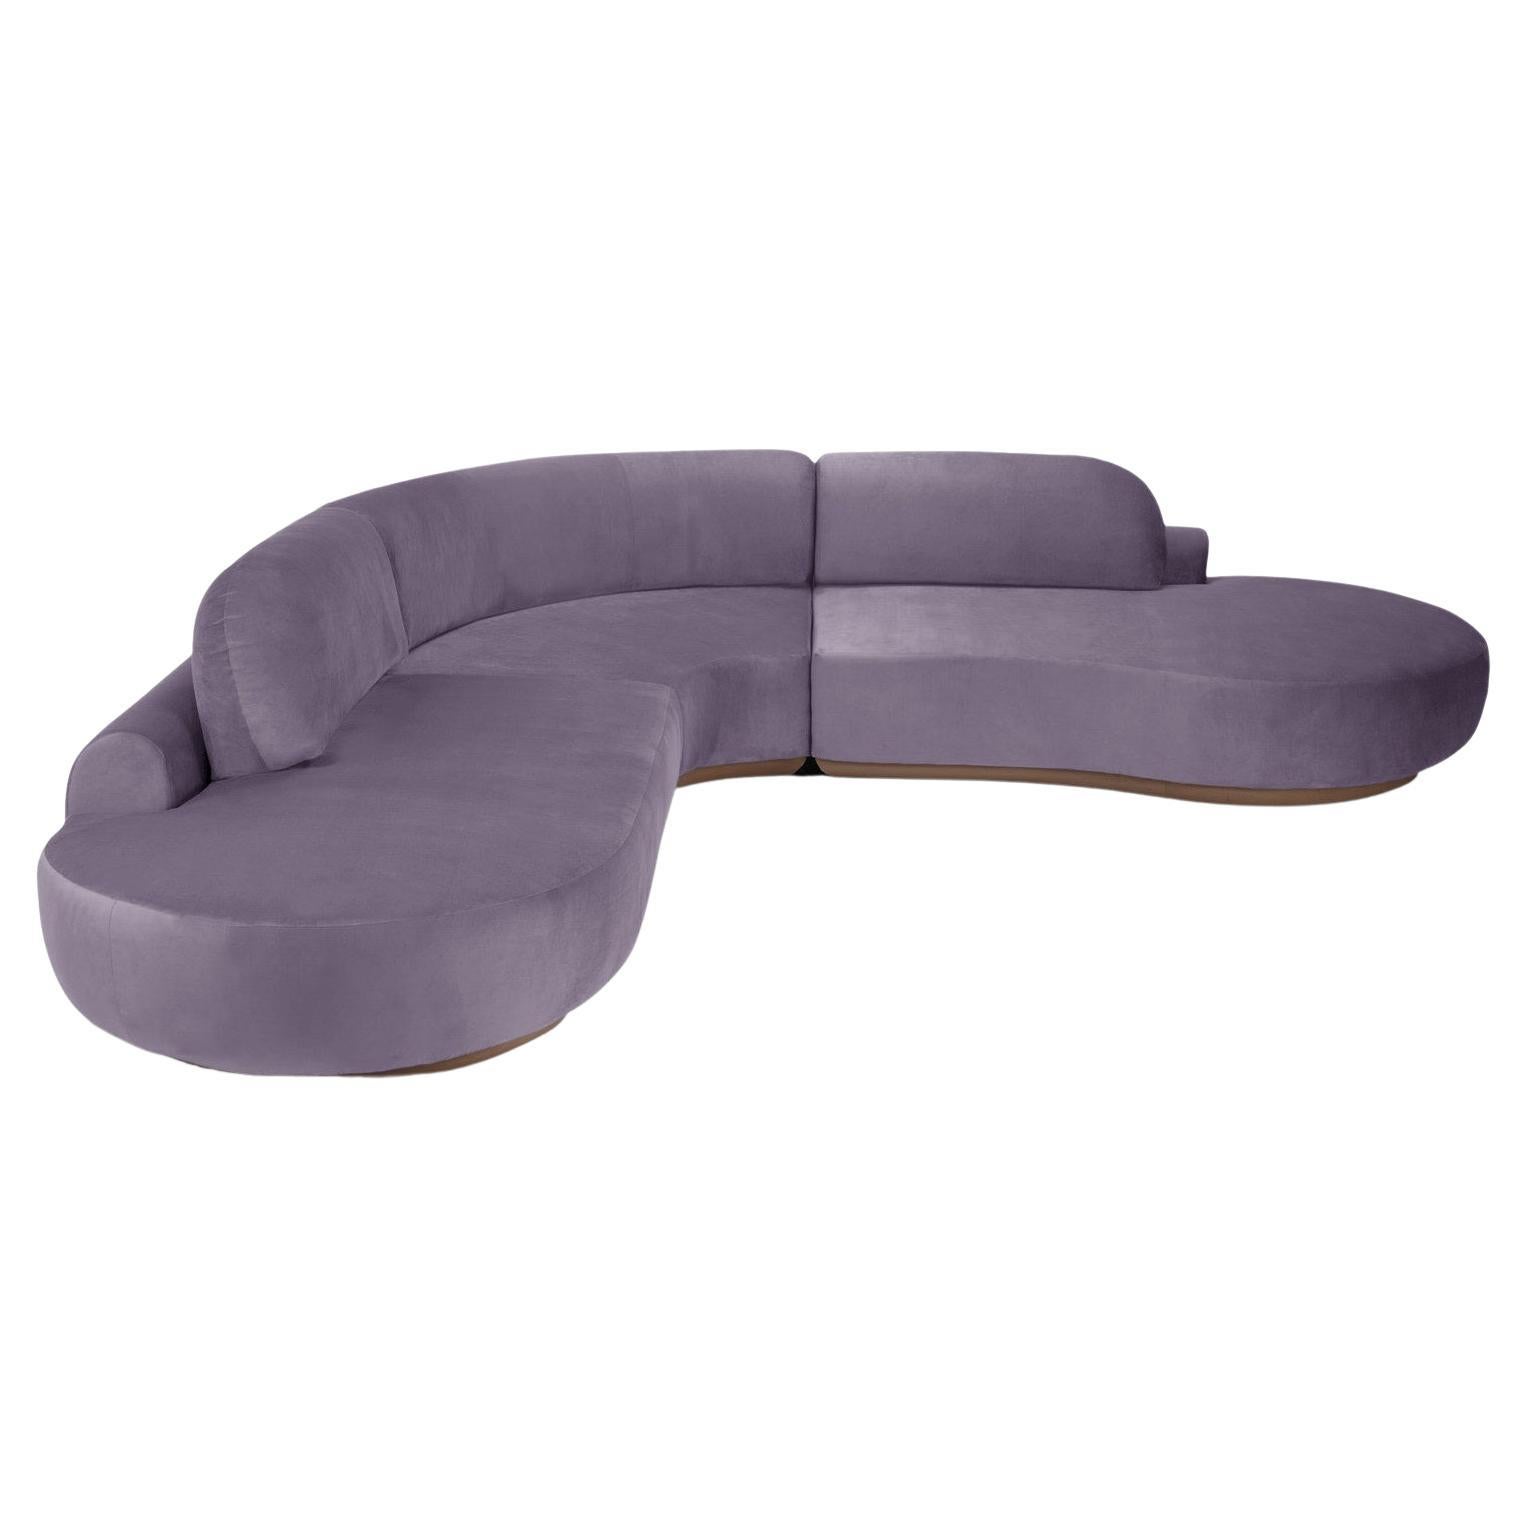 Naked Curved Sectional Sofa, 3 Piece with Beech Ash-056-1 and Paris Lavanda For Sale